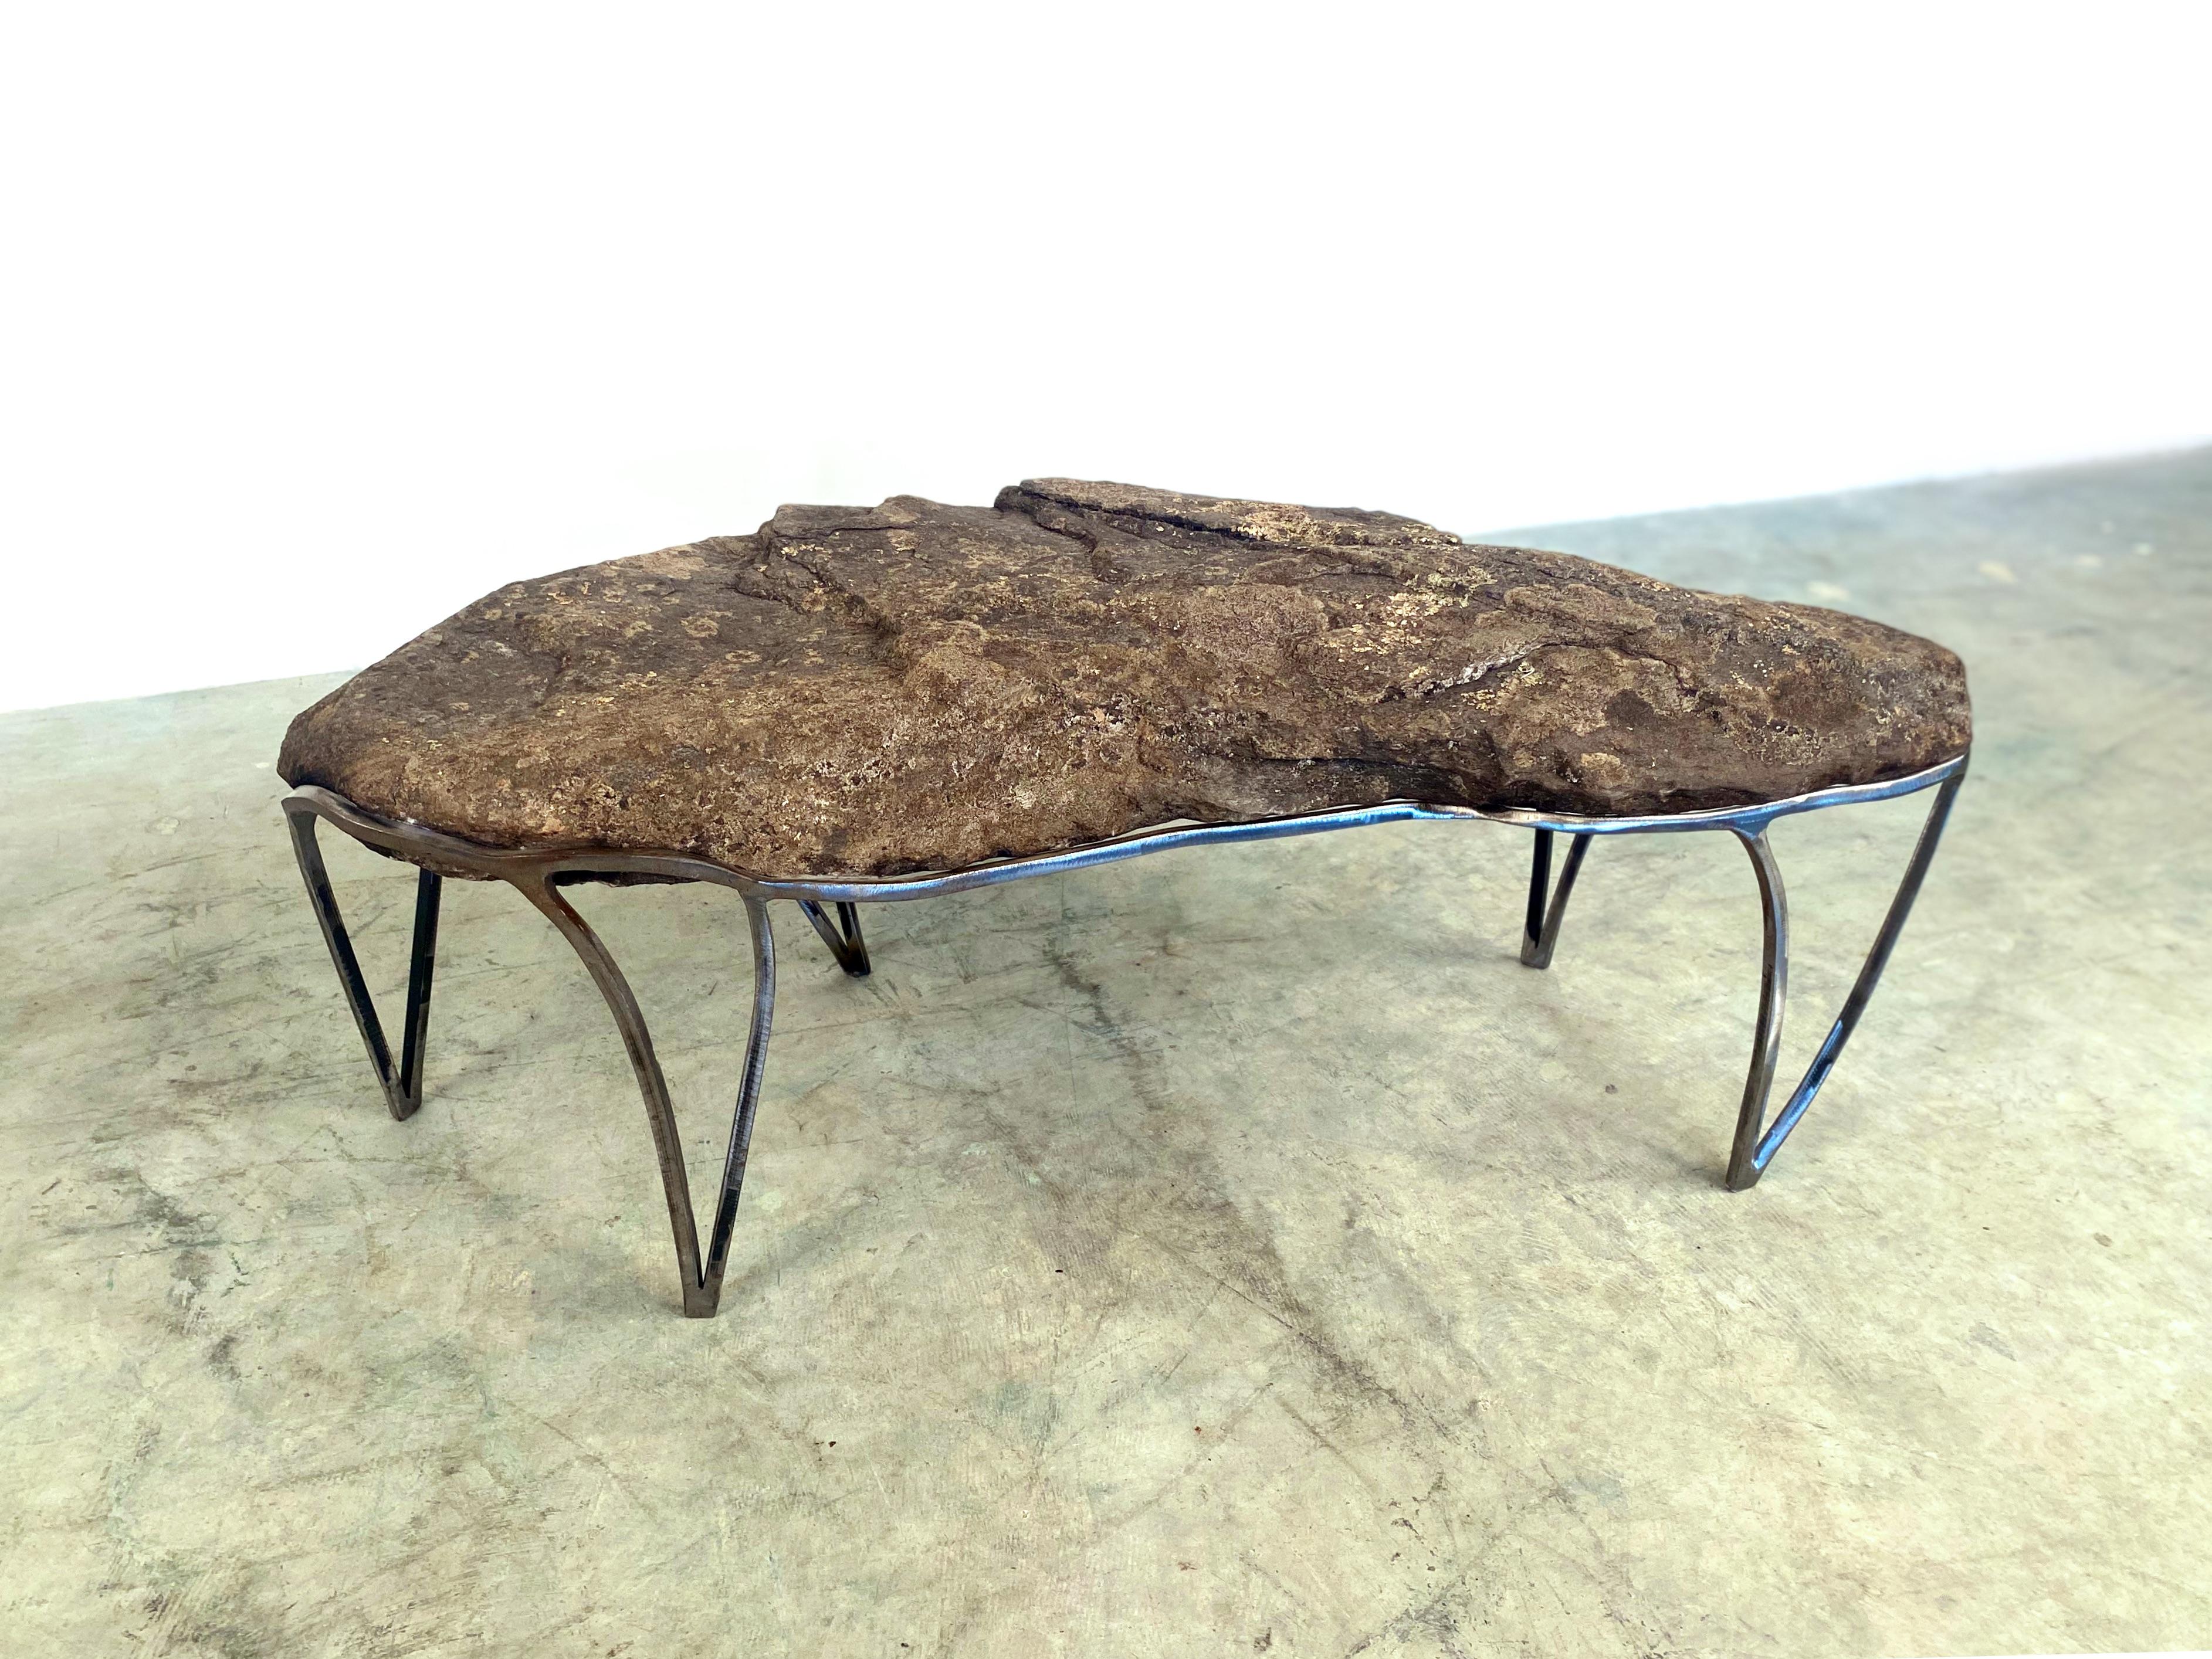 American Rock Table No.6 by Quinn Morrissette, Natural Stone and Steel Coffee Table 